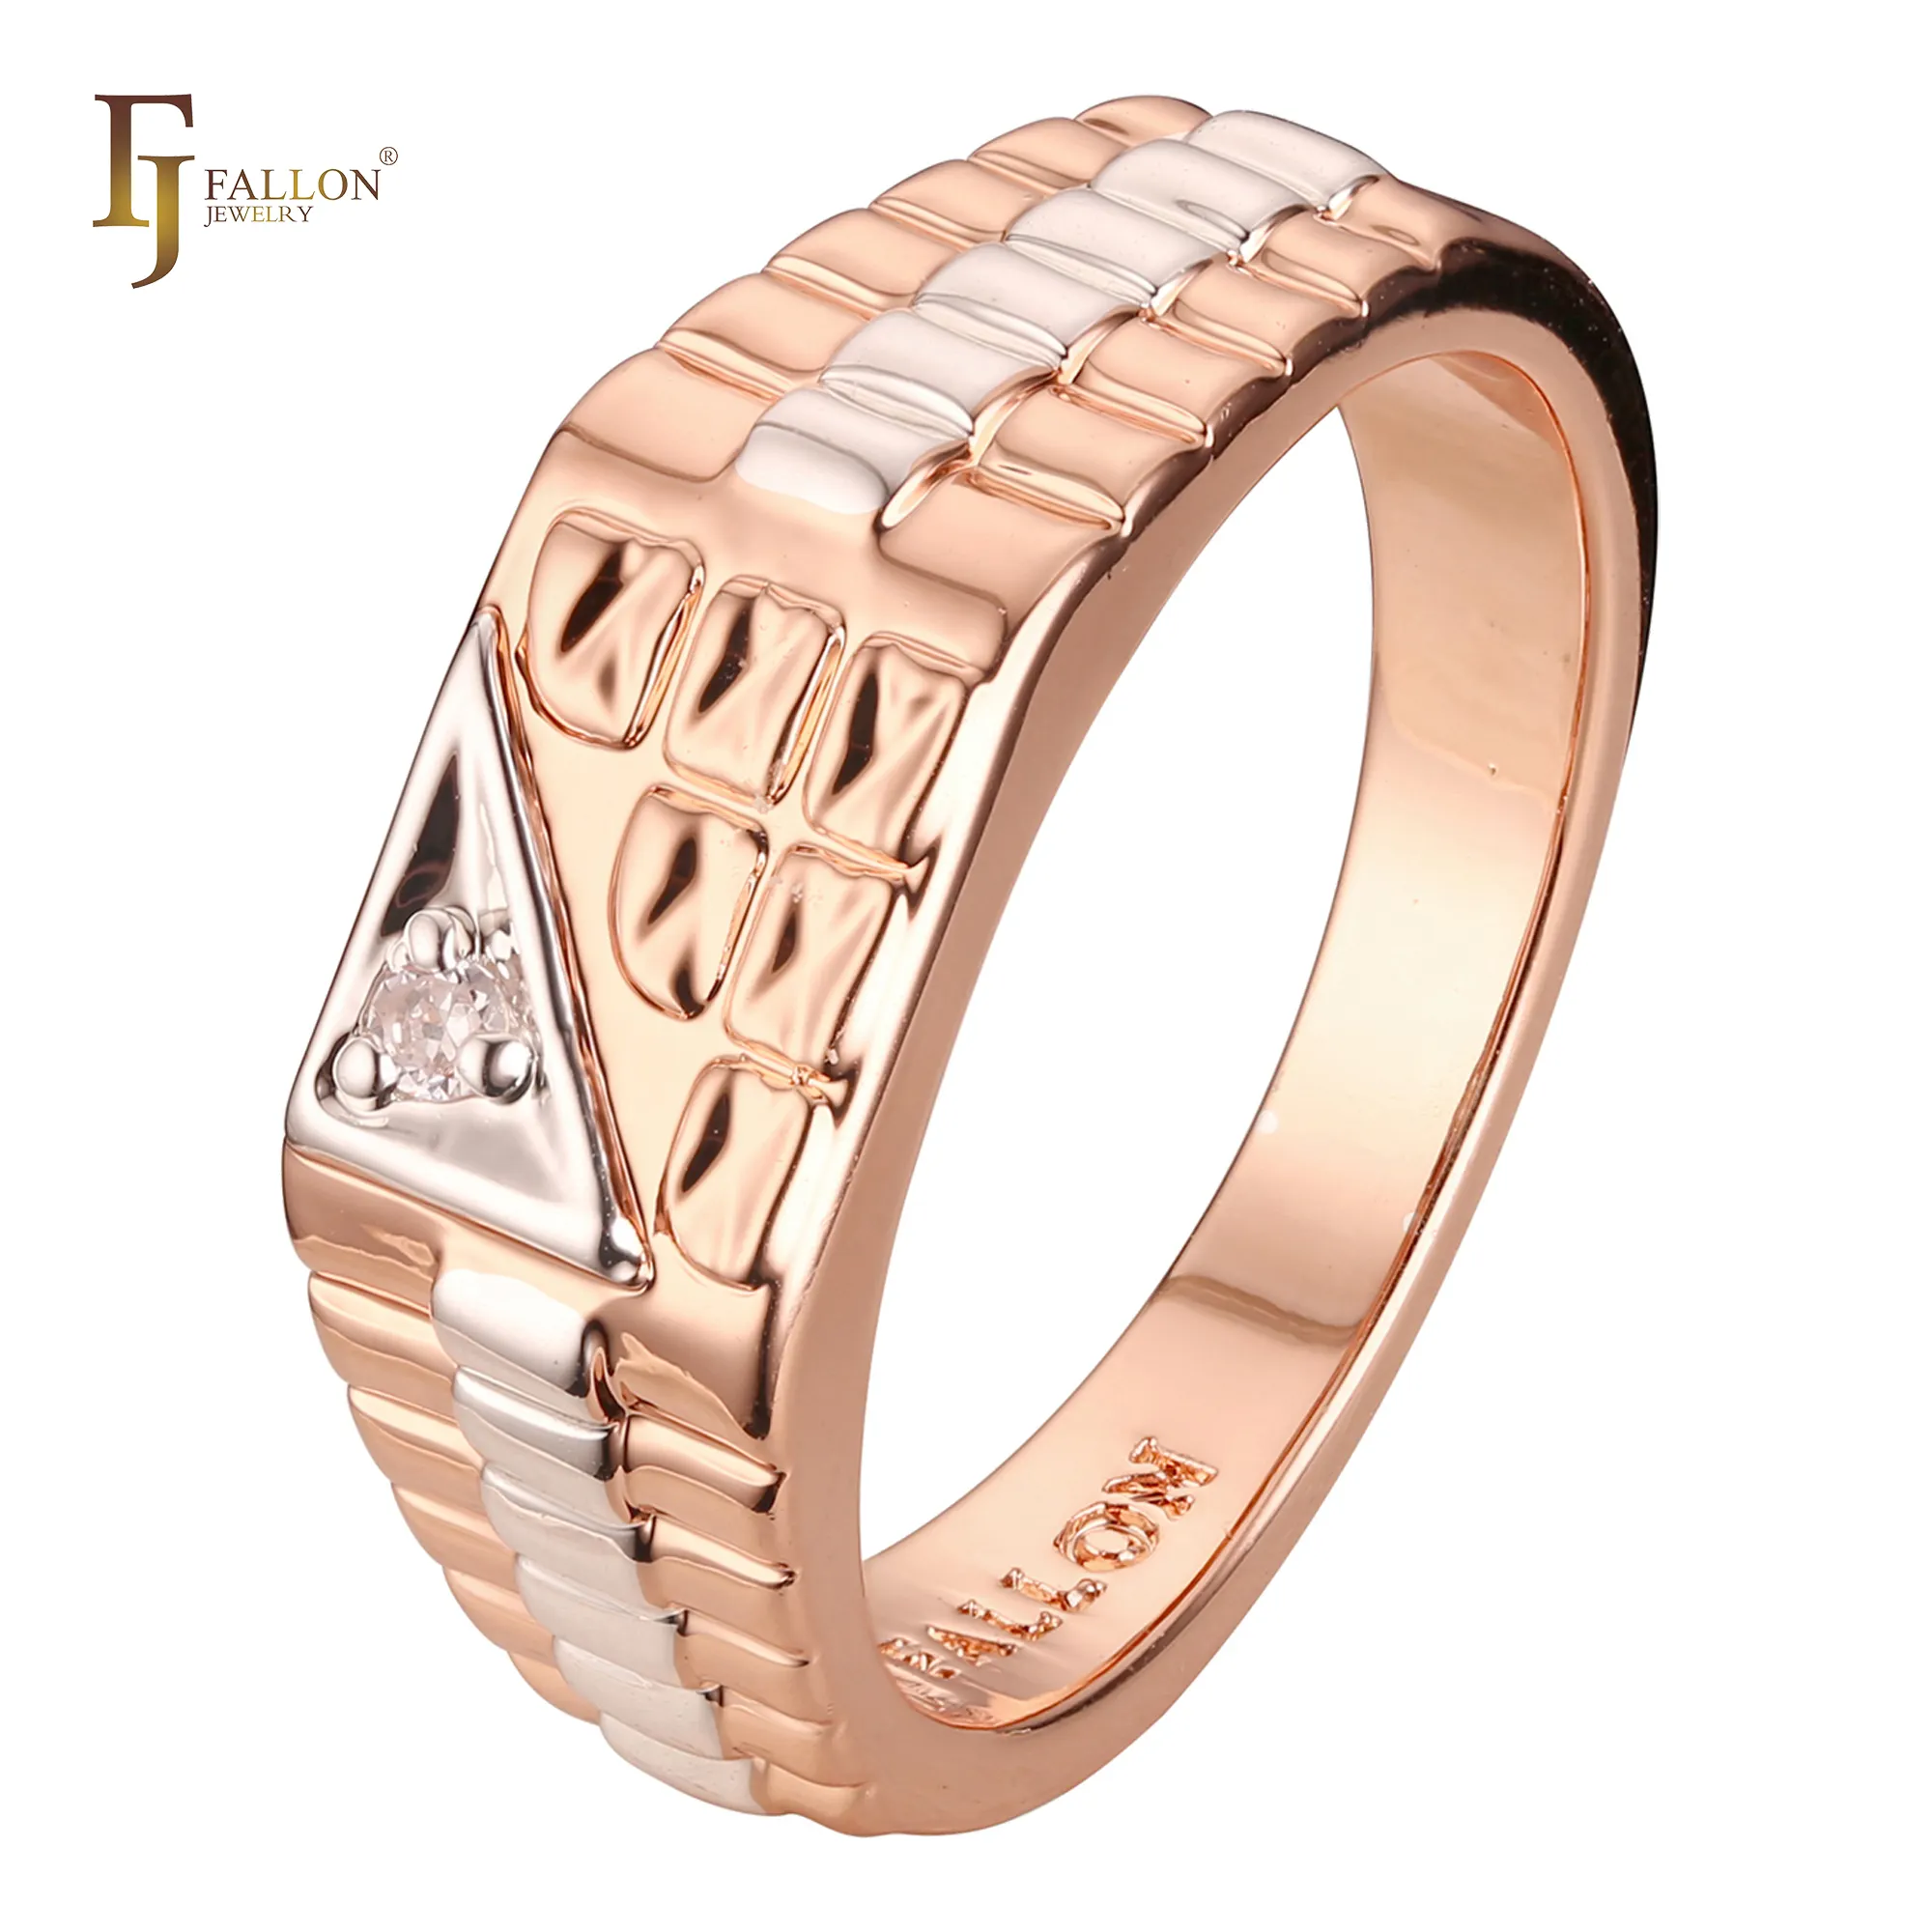 F93210082 FJ Fallon Fashion Jewelry Signet watch band Men's rings Plated in Rose Gold two tone brass based